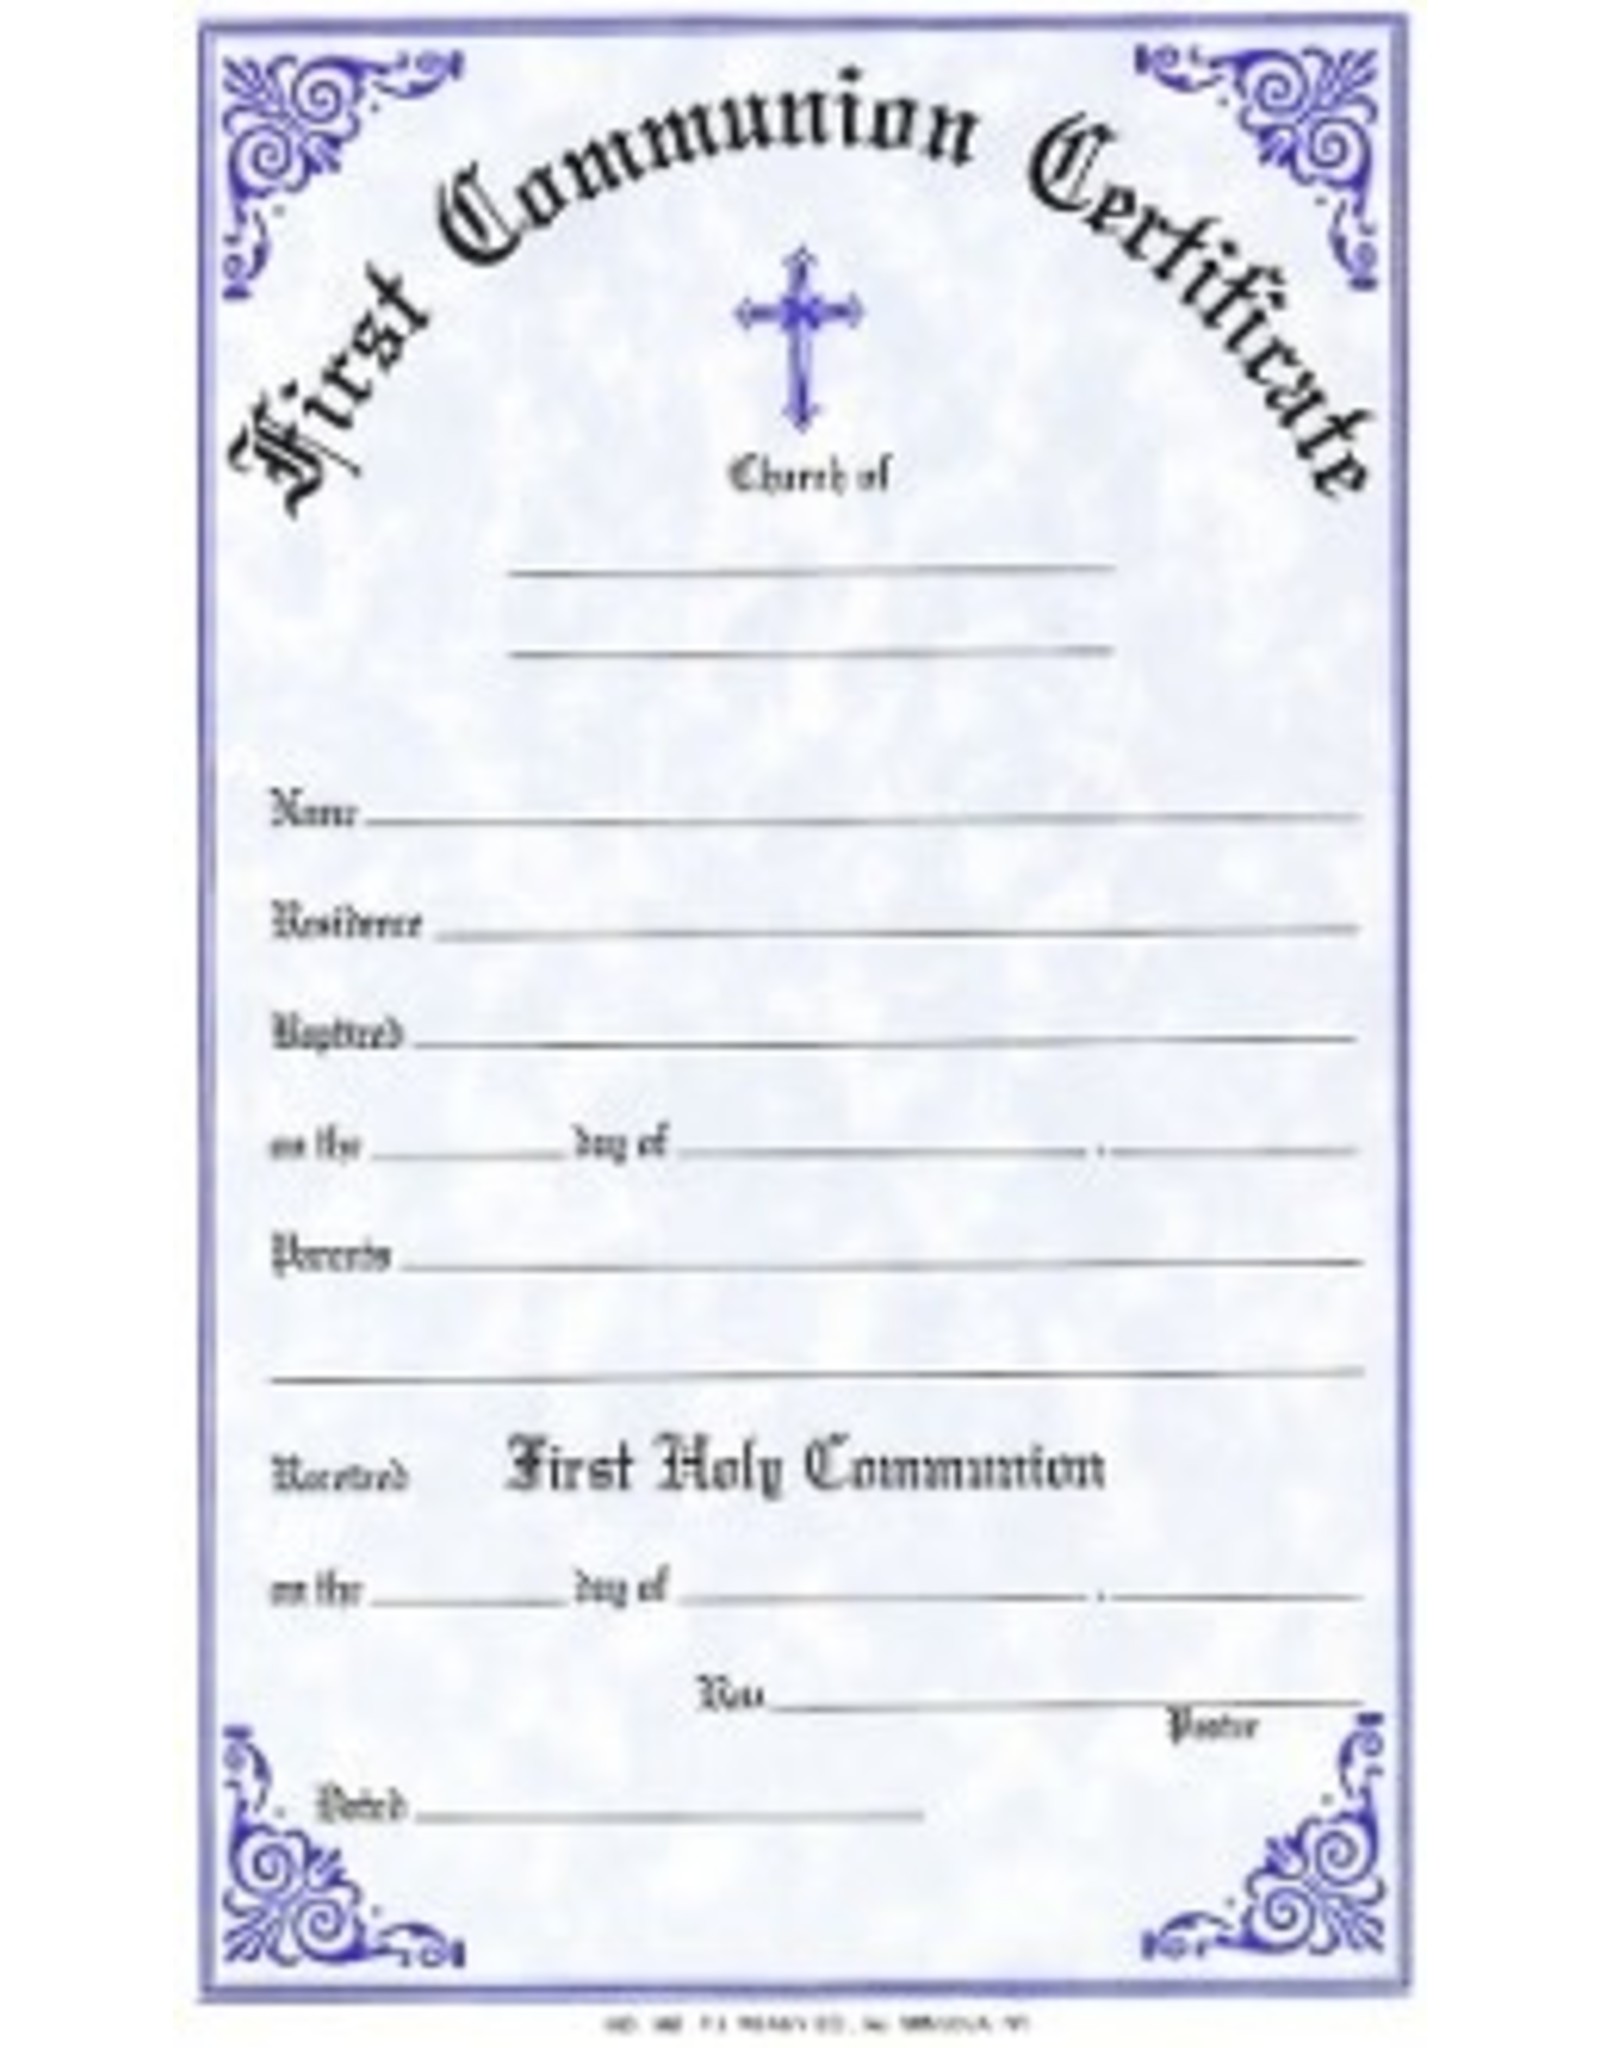 Remey, F.J. Certificates - First Communion (Pad of 50)